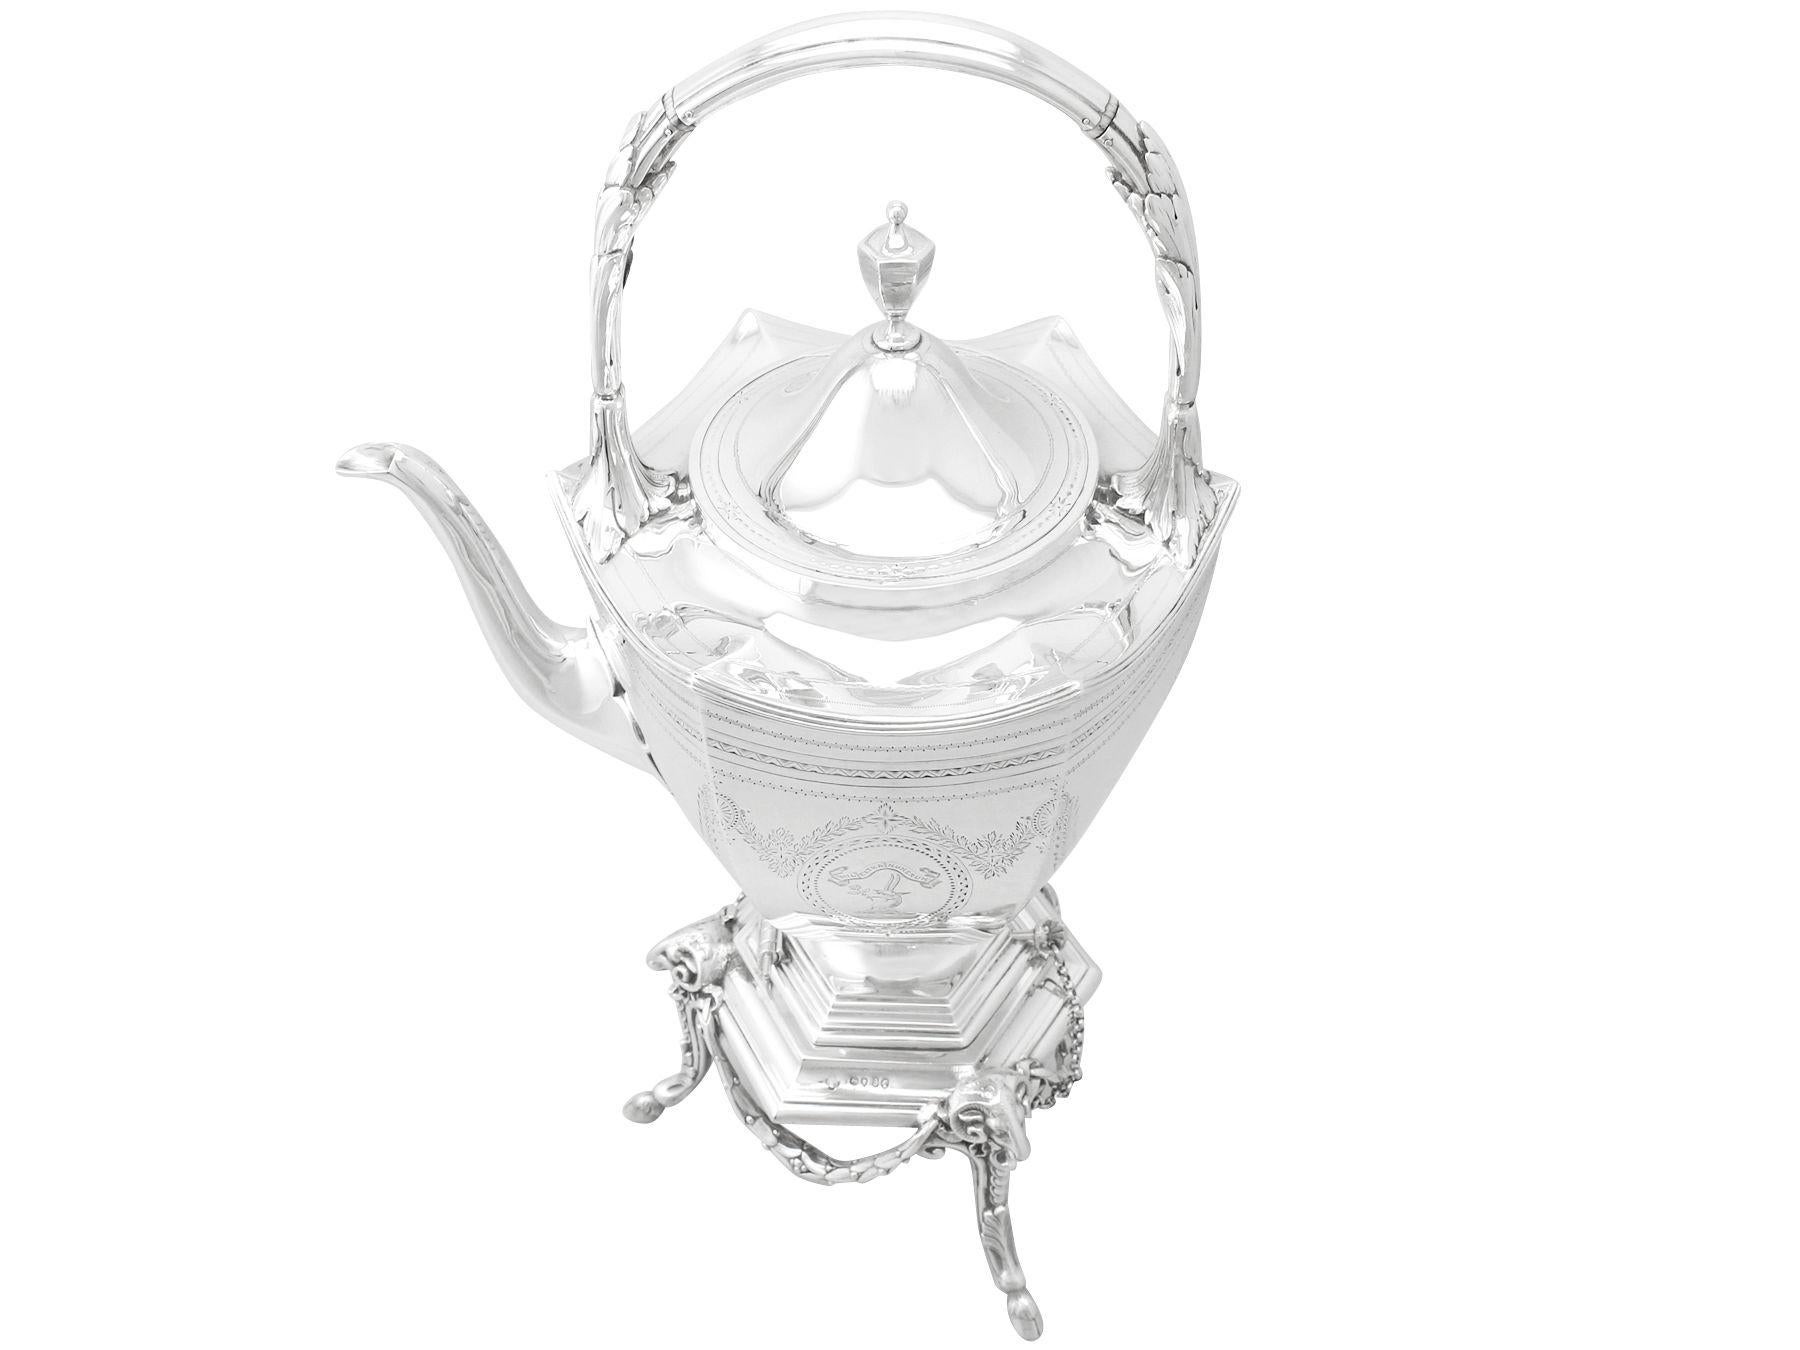 An magnificent, fine and impressive, large antique Victorian English sterling silver spirit kettle made by Barnard & Sons Ltd, an addition to our antique silver teaware collection.

This magnificent antique Victorian sterling silver spirit kettle